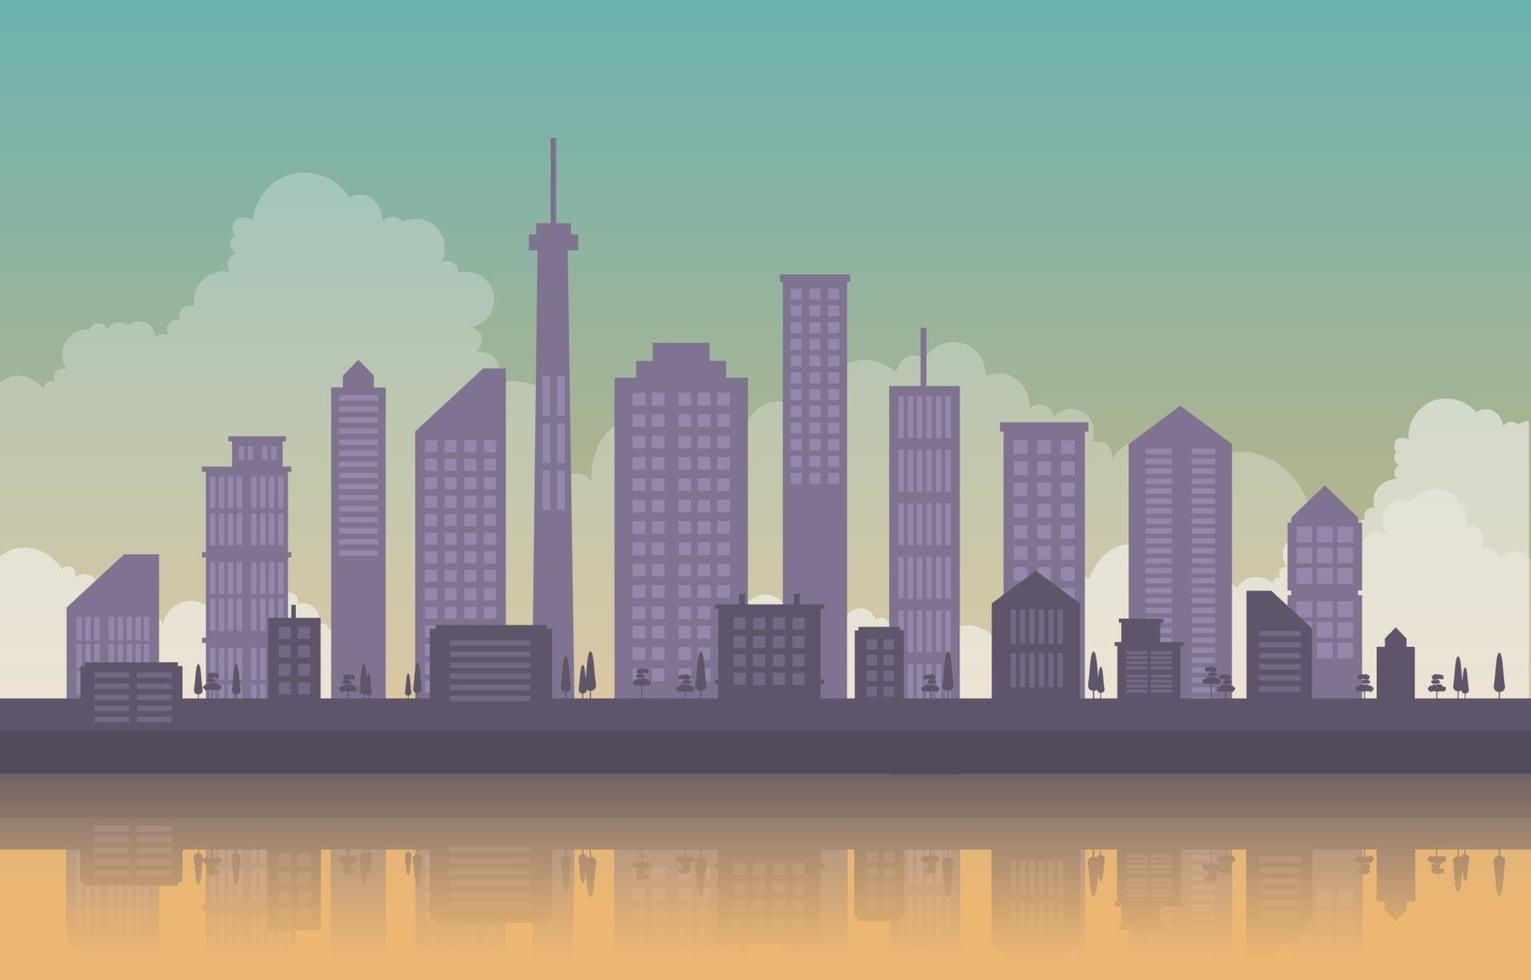 City Building Cityscape Skyline Water Reflection Business Illustration vector